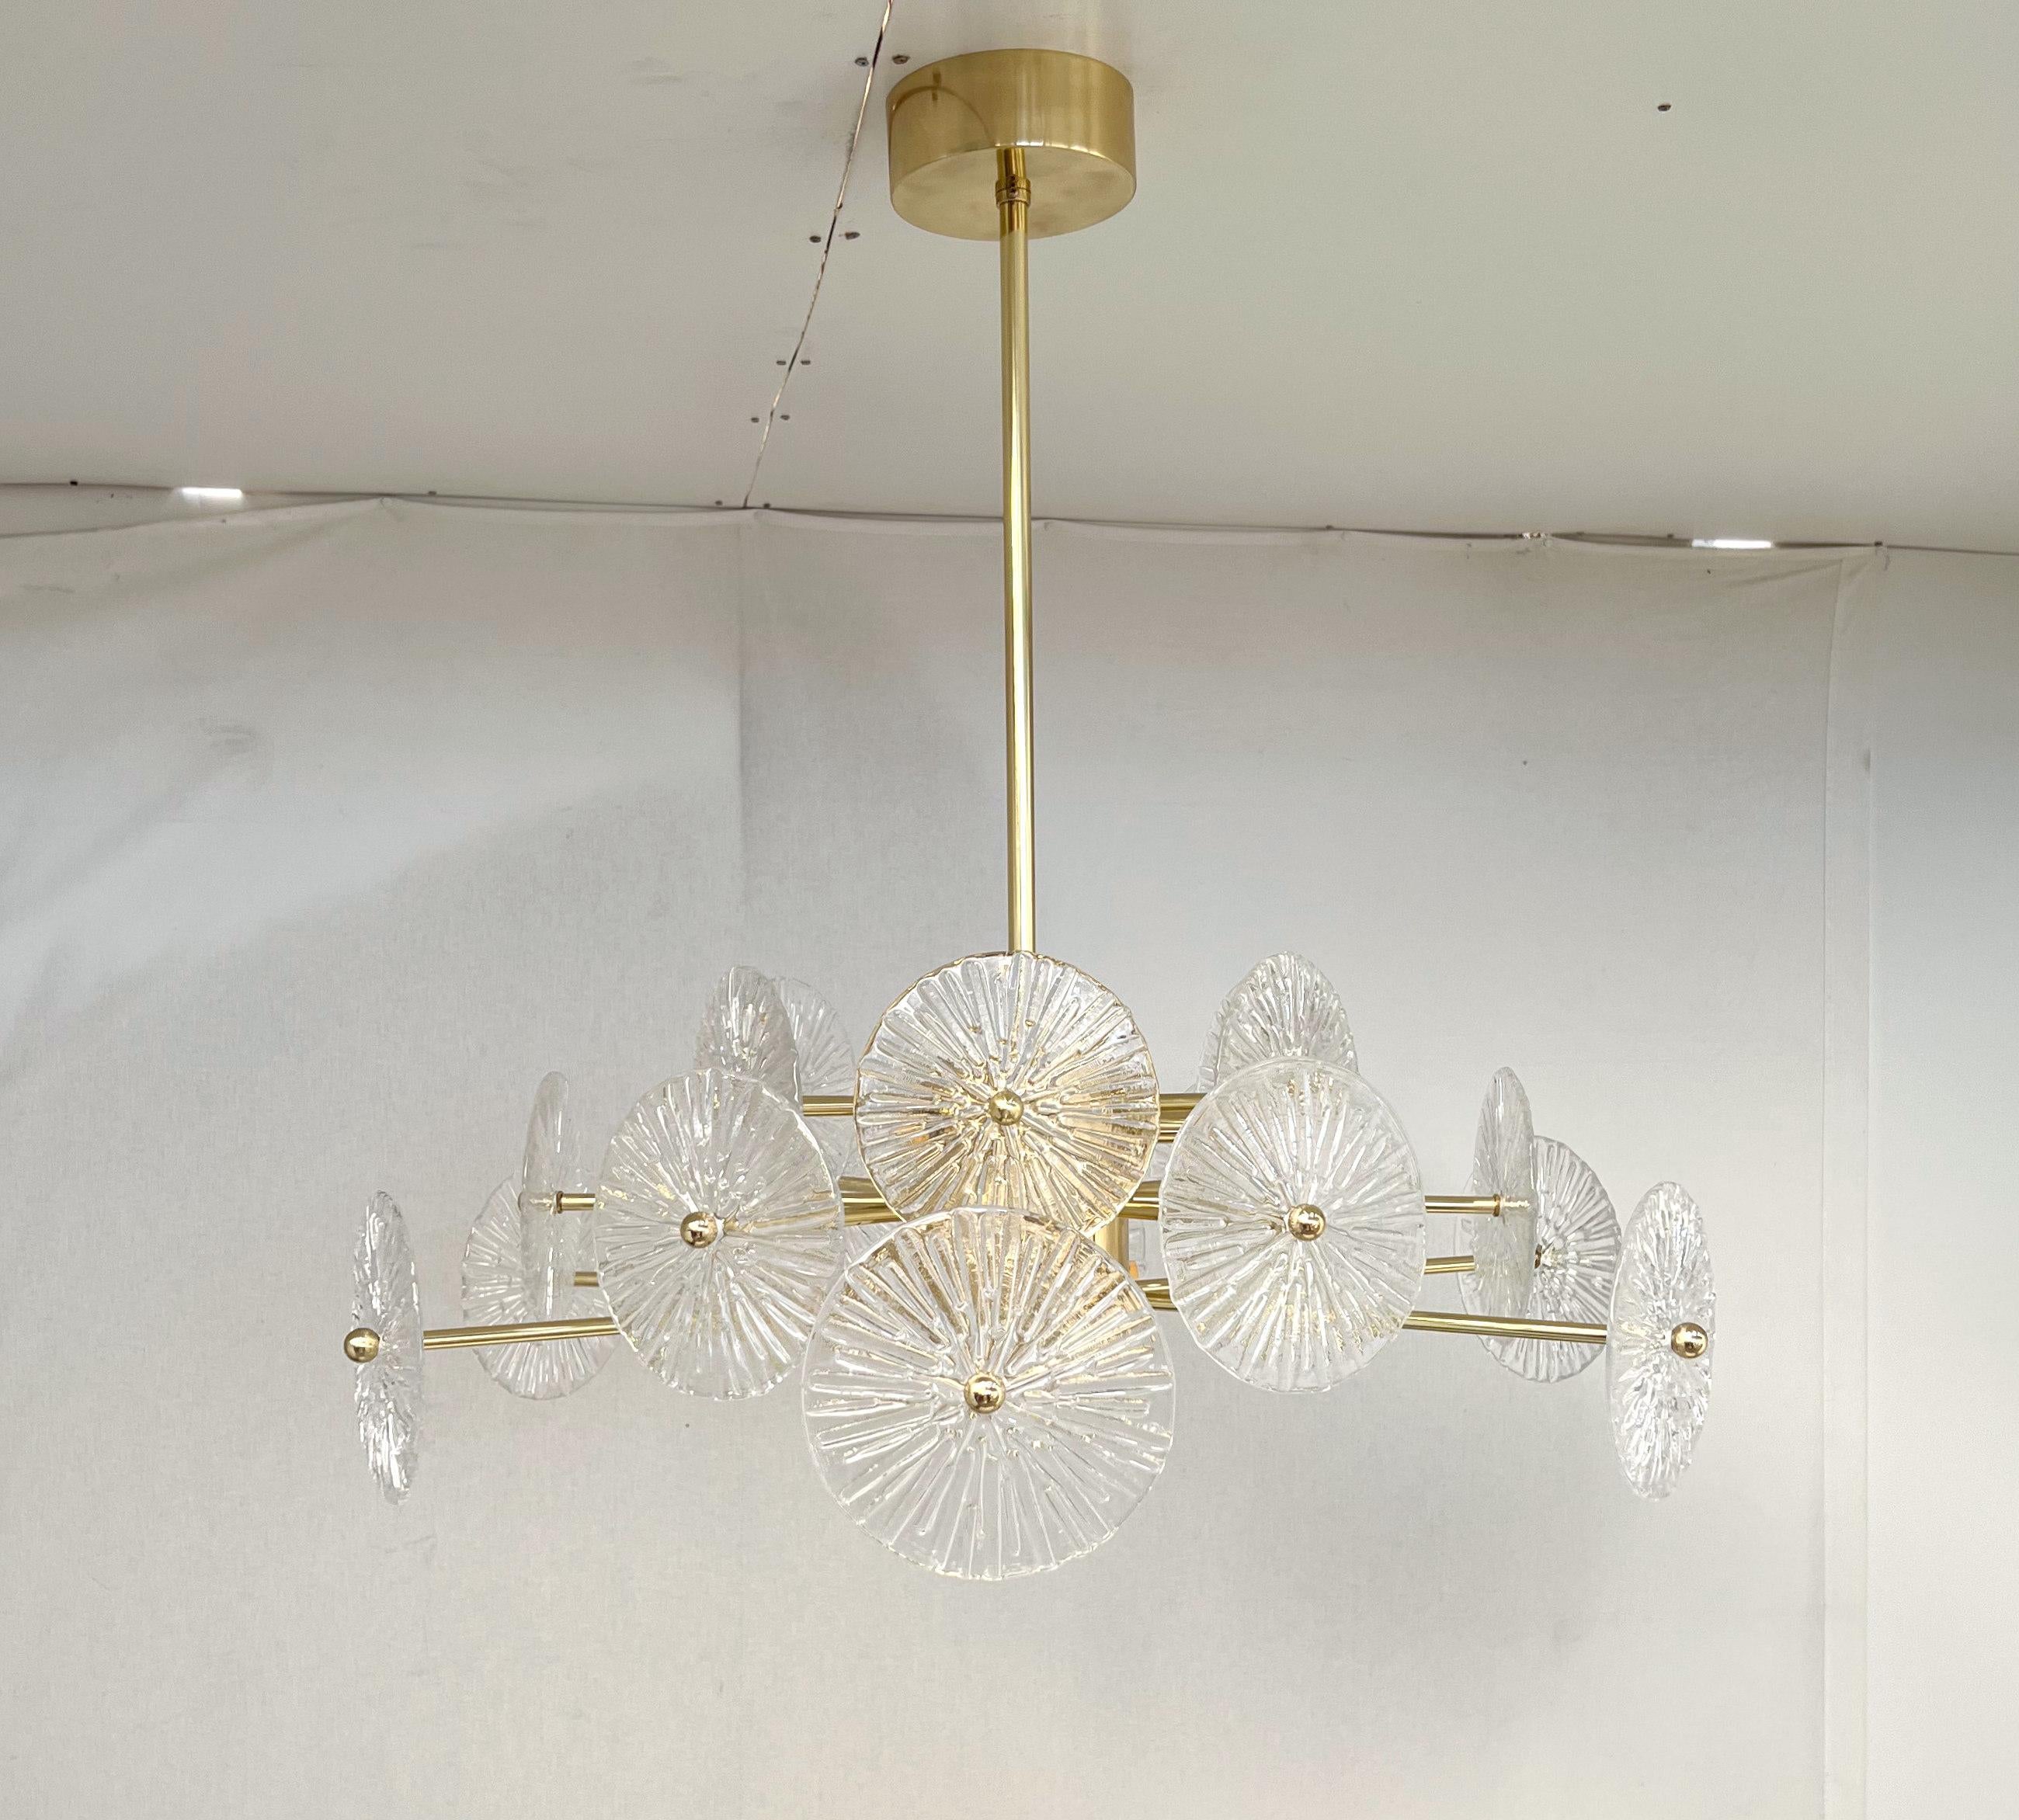 Italian chandelier with clear textured Murano glass discs mounted on lacquered polished brass finish frame, designed by Fabio Bergomi for Fabio Ltd / Made in Italy
6 lights / G9 type / max 40W each
Measures: Diameter: 29.5 inches / Height: 27.5